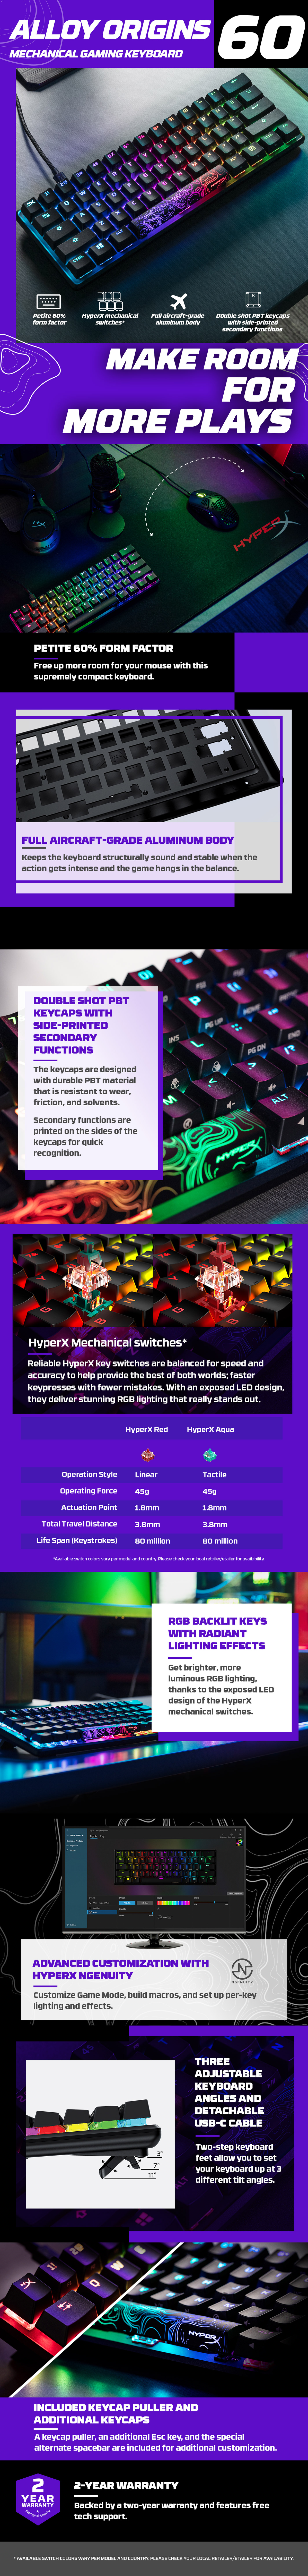 A large marketing image providing additional information about the product HyperX Alloy Origins 60 - Compact Mechanical Keyboard (HyperX Aqua Switch) - Additional alt info not provided